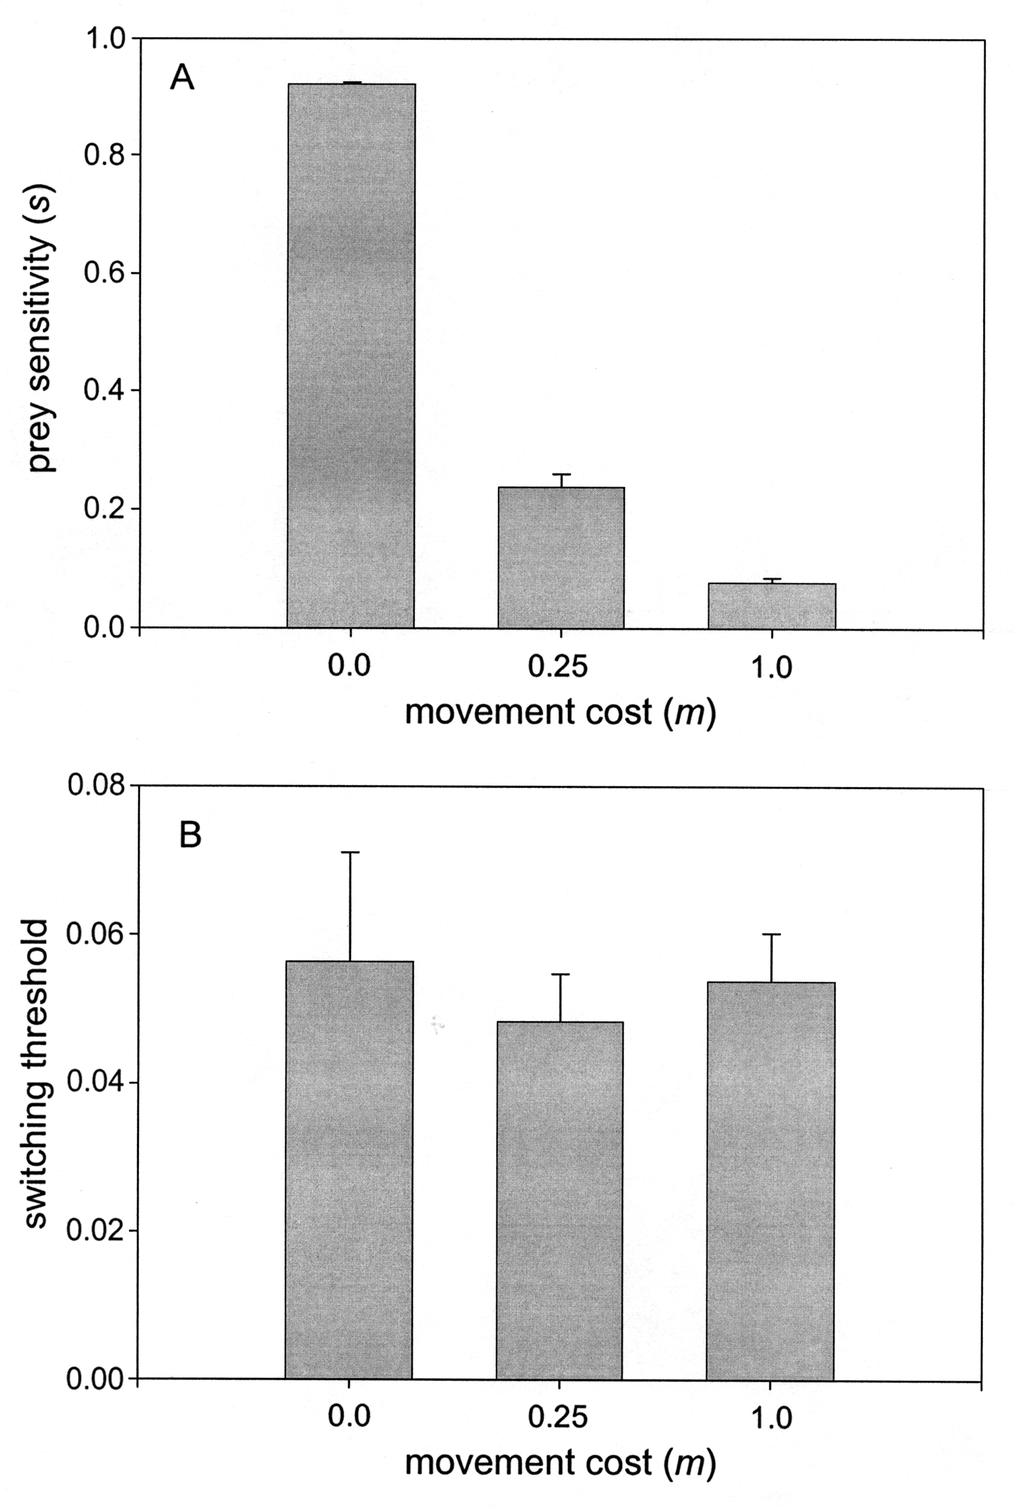 198 T. KIMBRELL AND R.D. HOLT Isr. J. Zool. Fig. 6. Evolution of (A) prey sensitivity and (B) predator switching threshold, under three different movement costs.